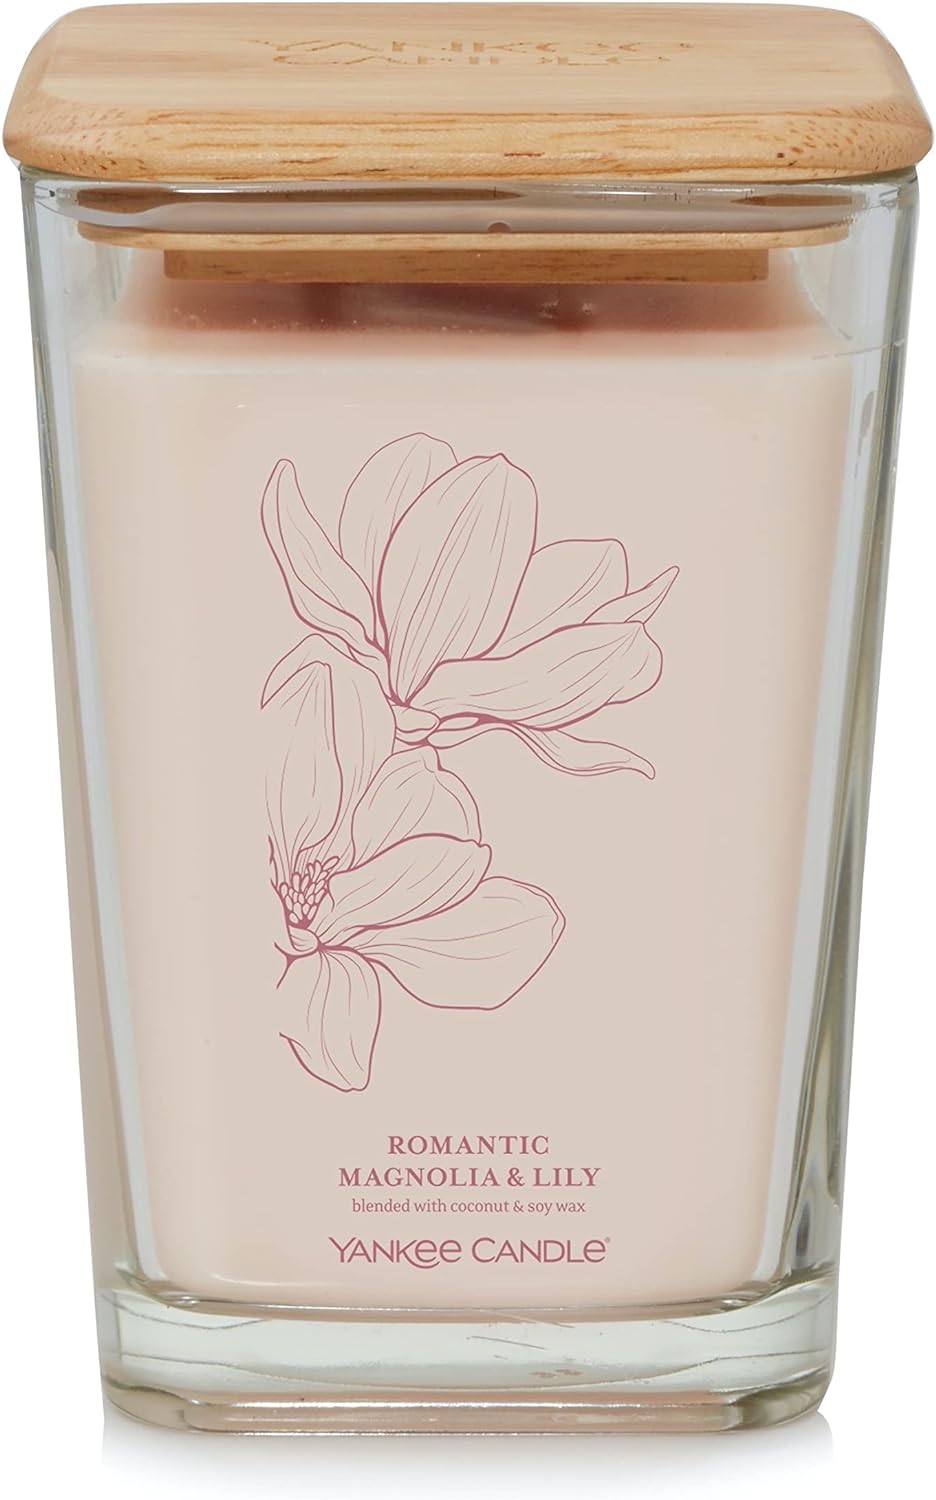 Yankee Candle Romantic Magnolia & Lily Well Living Collection Large Square Candle, 19.5 oz., Light Pink